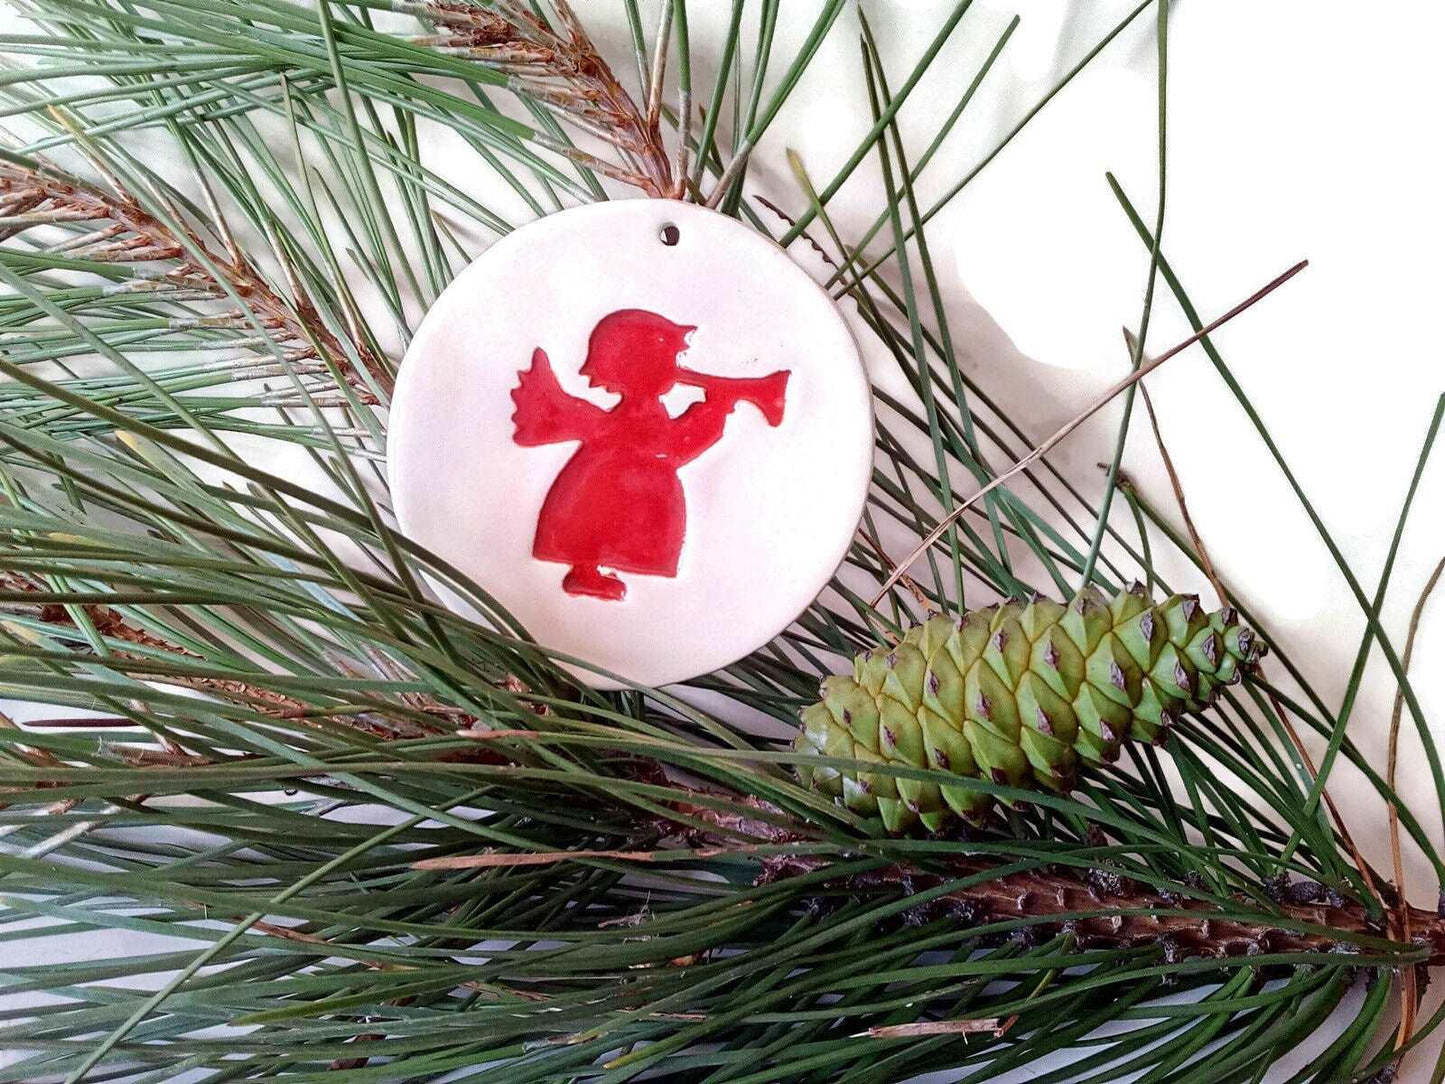 1Pc Handmade Ceramic Red and White Angel Wall Hanging, Round Christmas Tree Ornaments, Christian Wall Art, Pottery Nursery Wall Art